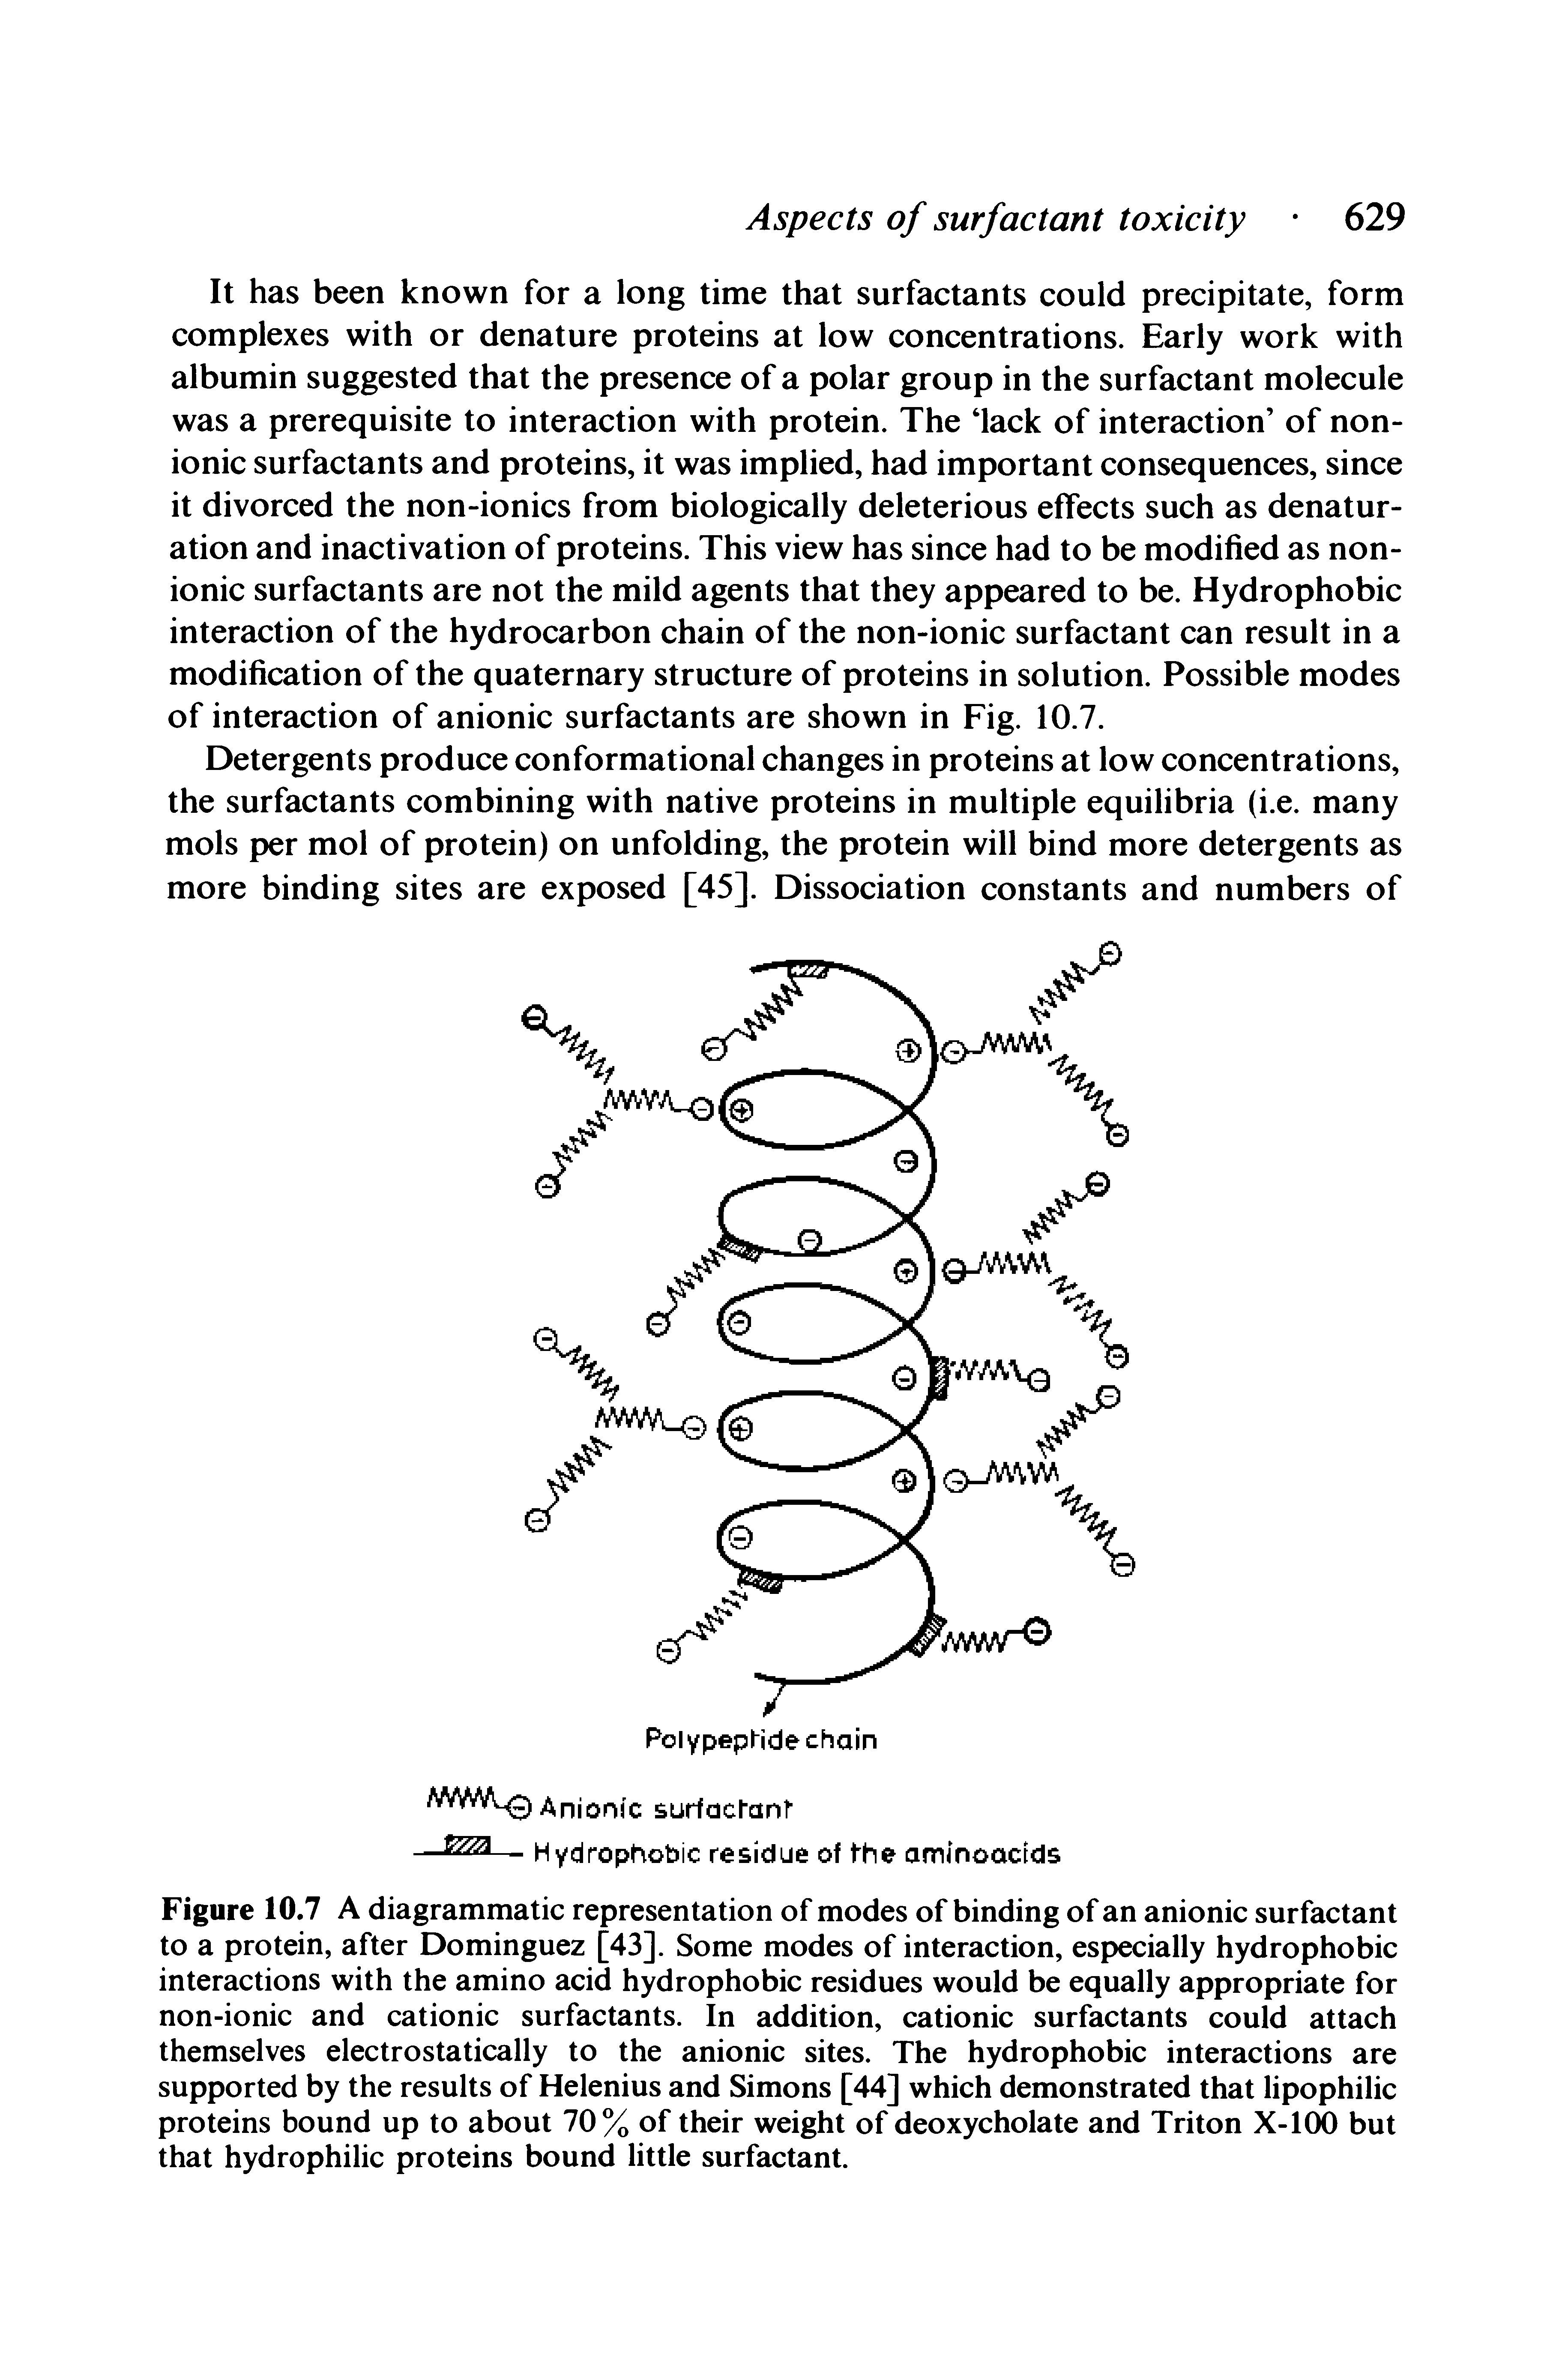 Figure 10.7 A diagrammatic representation of modes of binding of an anionic surfactant to a protein, after Dominguez [43]. Some modes of interaction, especially hydrophobic interactions with the amino acid hydrophobic residues would be equally appropriate for non-ionic and cationic surfactants. In addition, cationic surfactants could attach themselves electrostatically to the anionic sites. The hydrophobic interactions are supported by the results of Helenius and Simons [44] which demonstrated that lipophilic proteins bound up to about 70% of their weight of deoxycholate and Triton X-lOO but that hydrophilic proteins bound little surfactant.